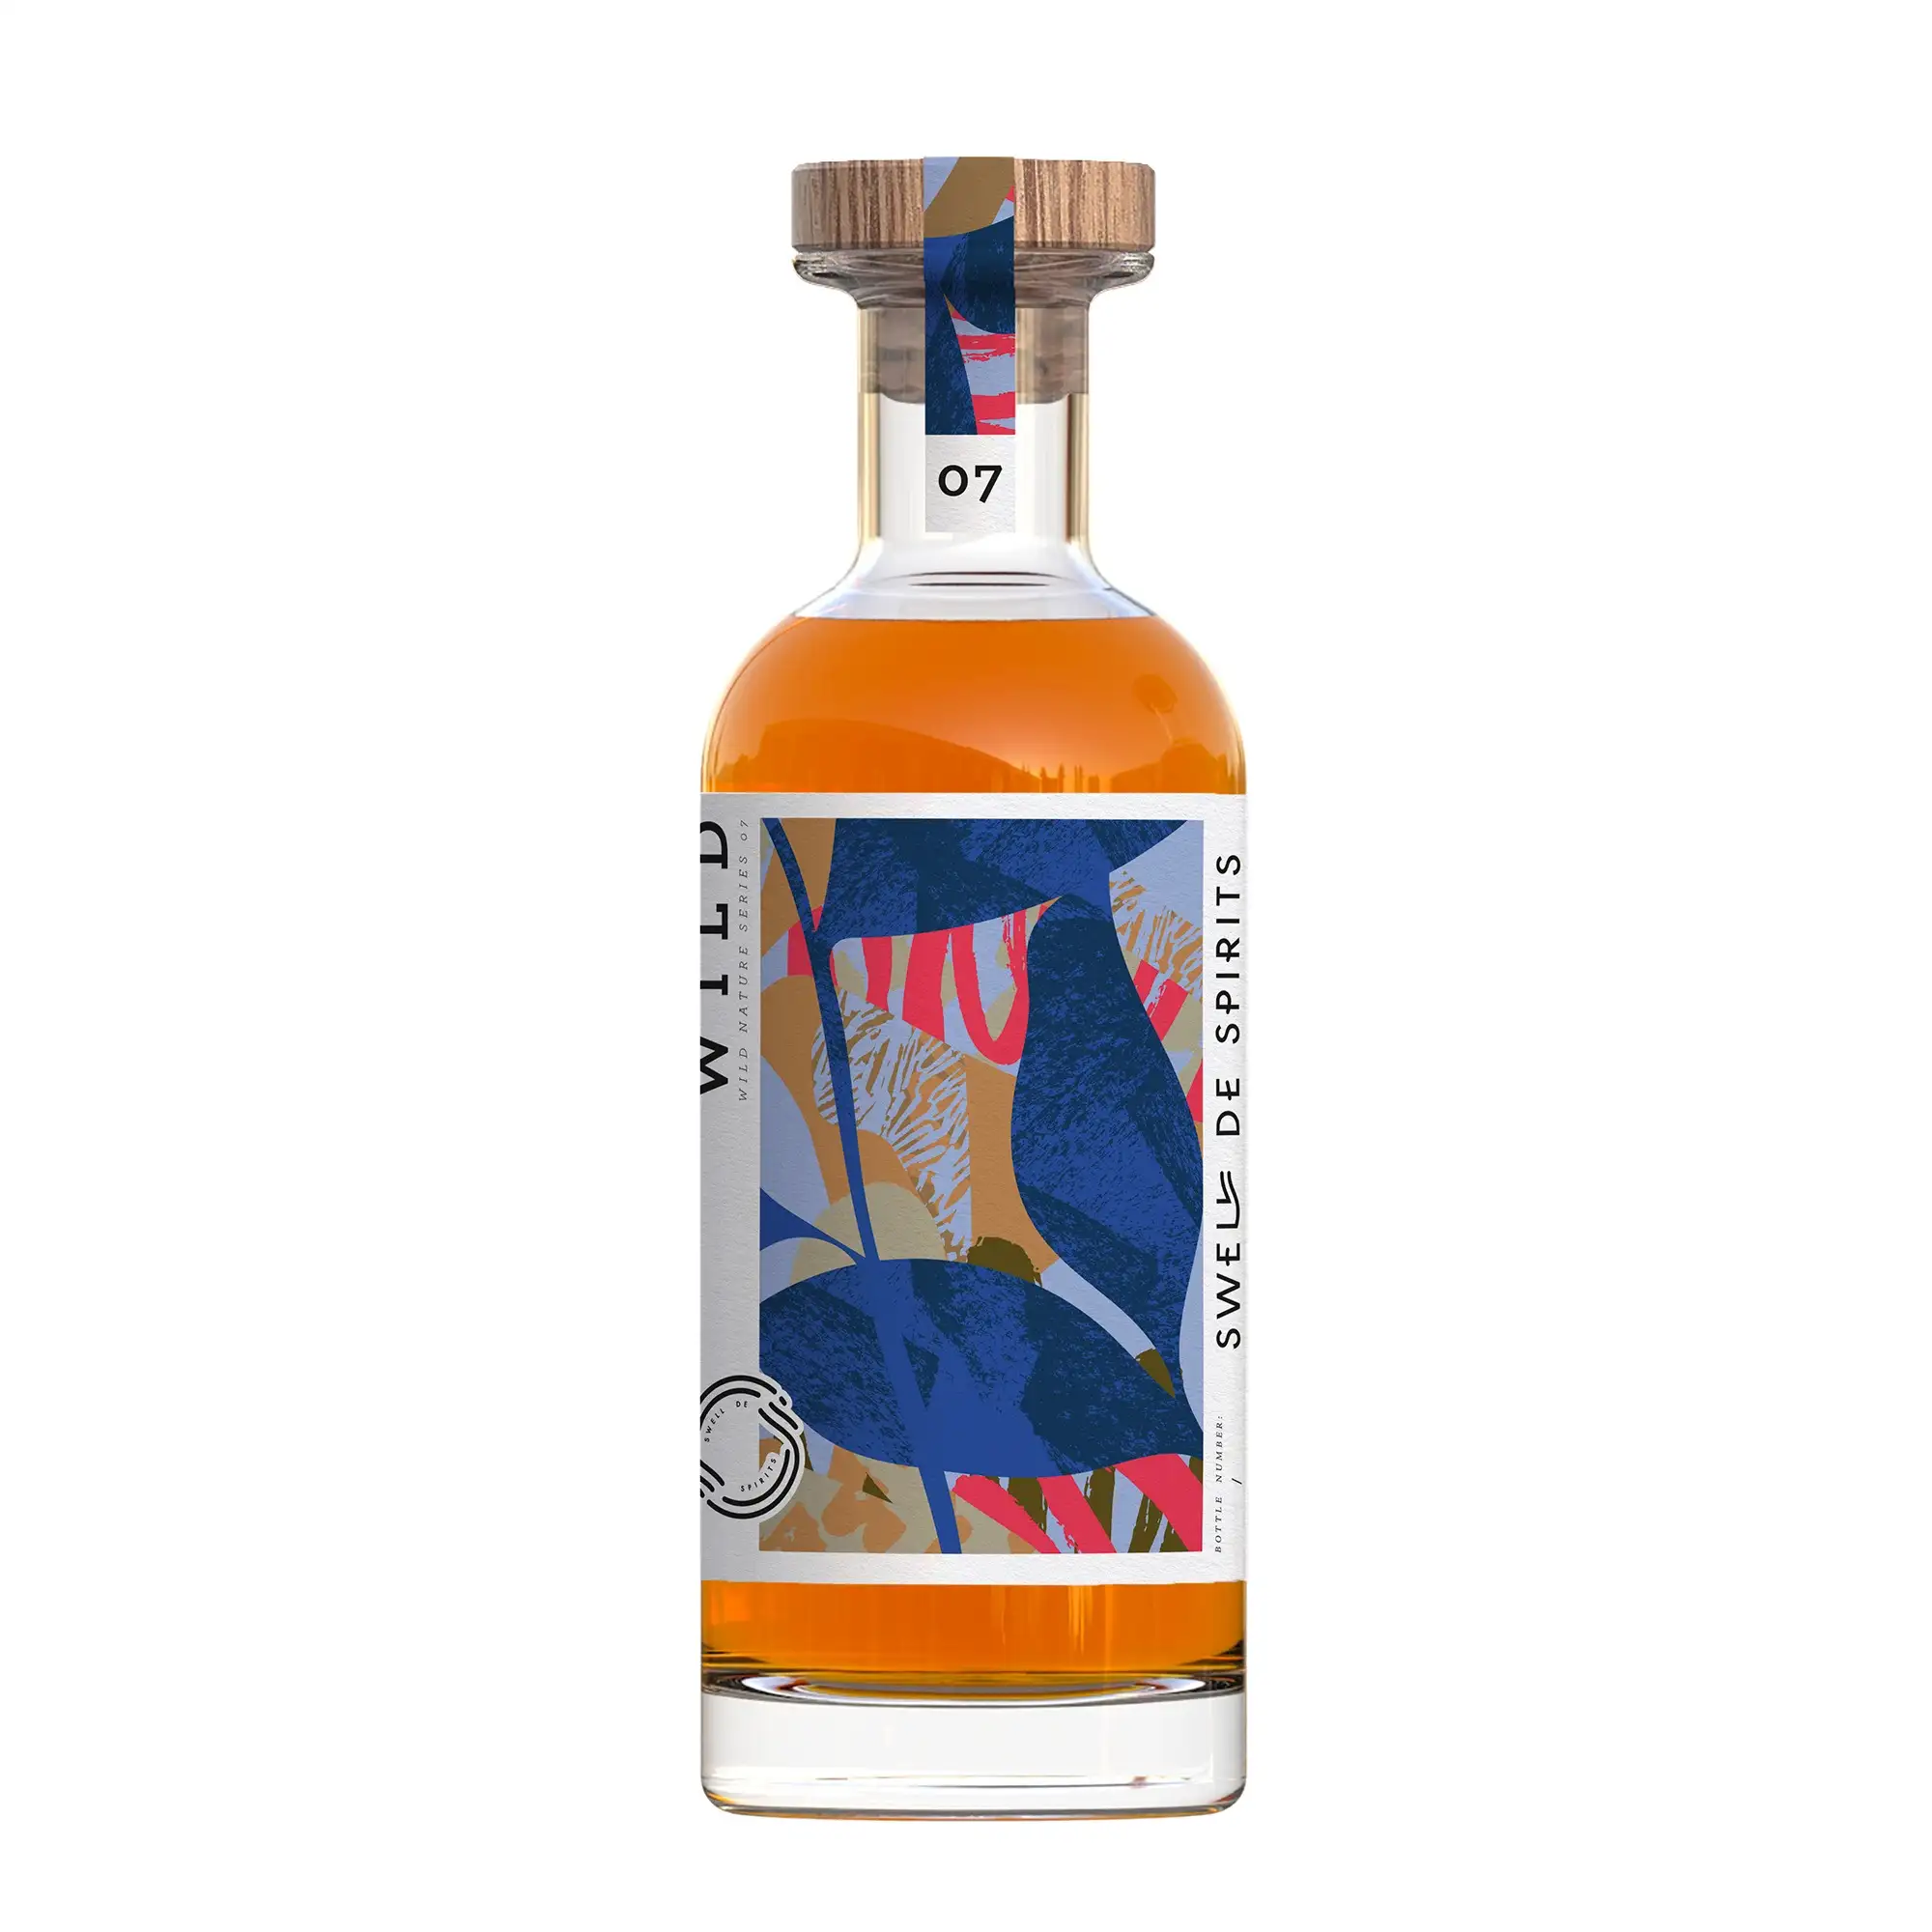 Image of the front of the bottle of the rum Wild Nature Series